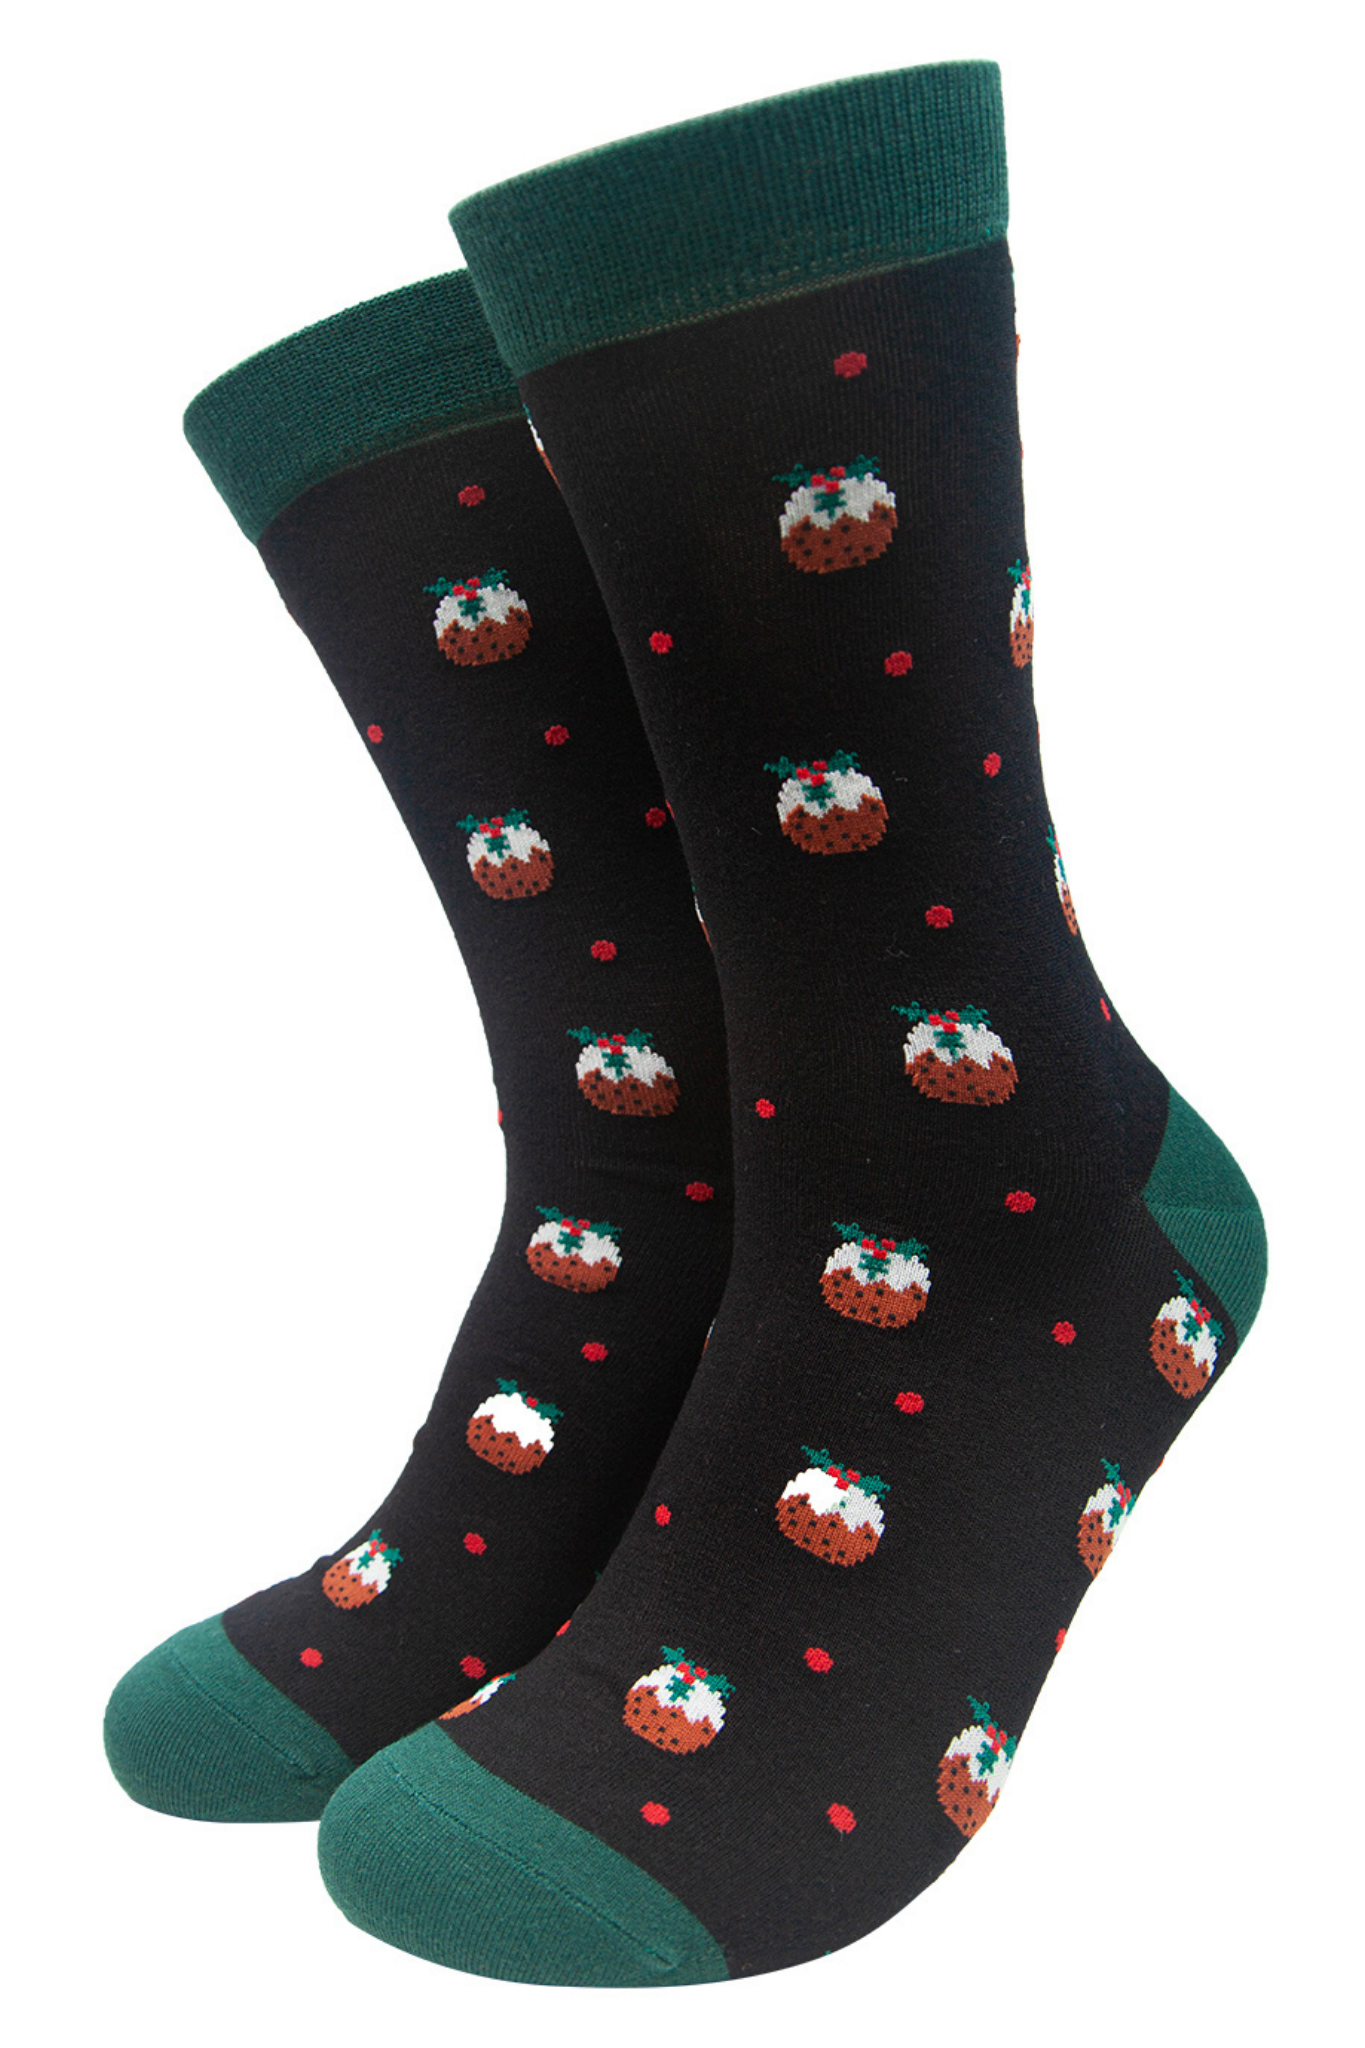 black bamboo socks with xmas puddings all over